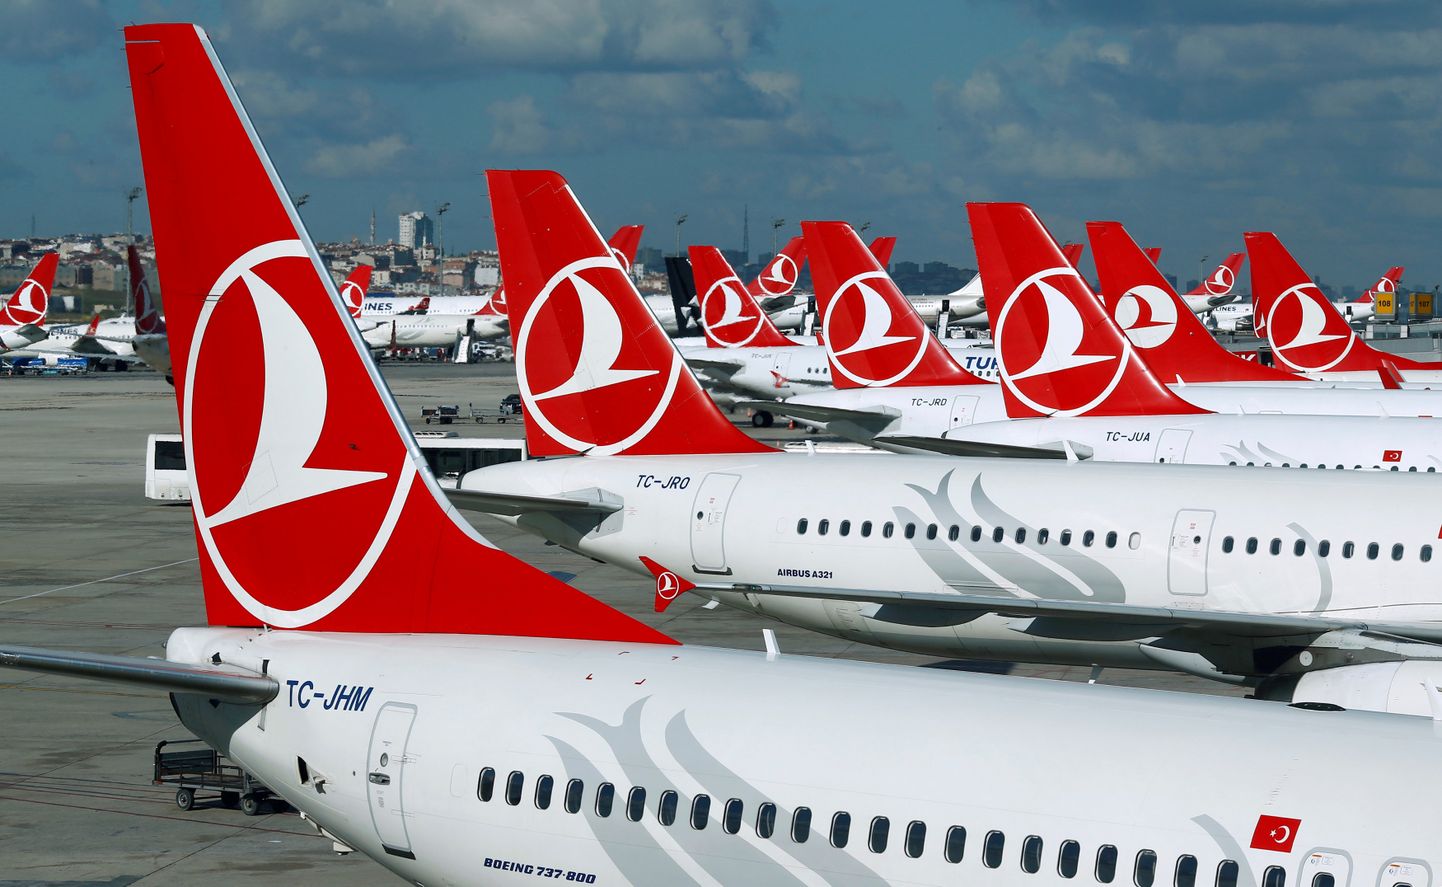 FILE PHOTO: Turkish Airlines aircrafts are parked at the Ataturk International airport in Istanbul, Turkey, December 3, 2015. REUTERS/Murad Sezer/File Photo